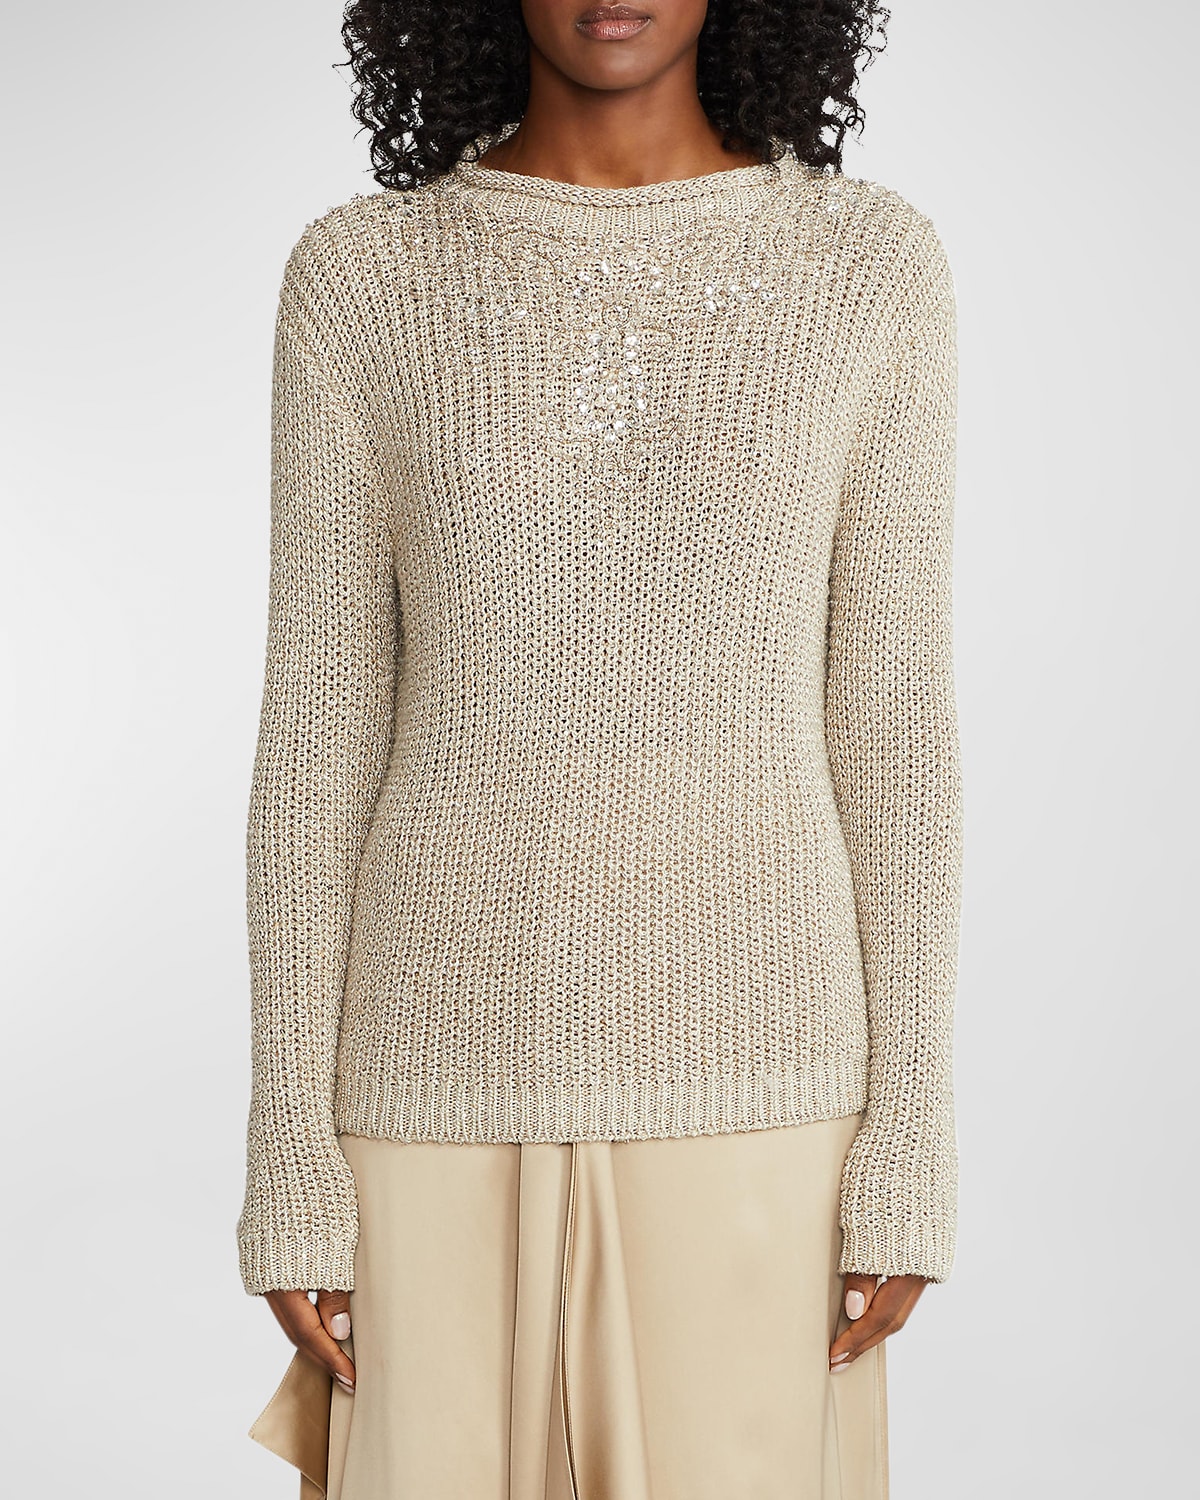 Crystal Embellished Roll-Neck Open Weave Sweater